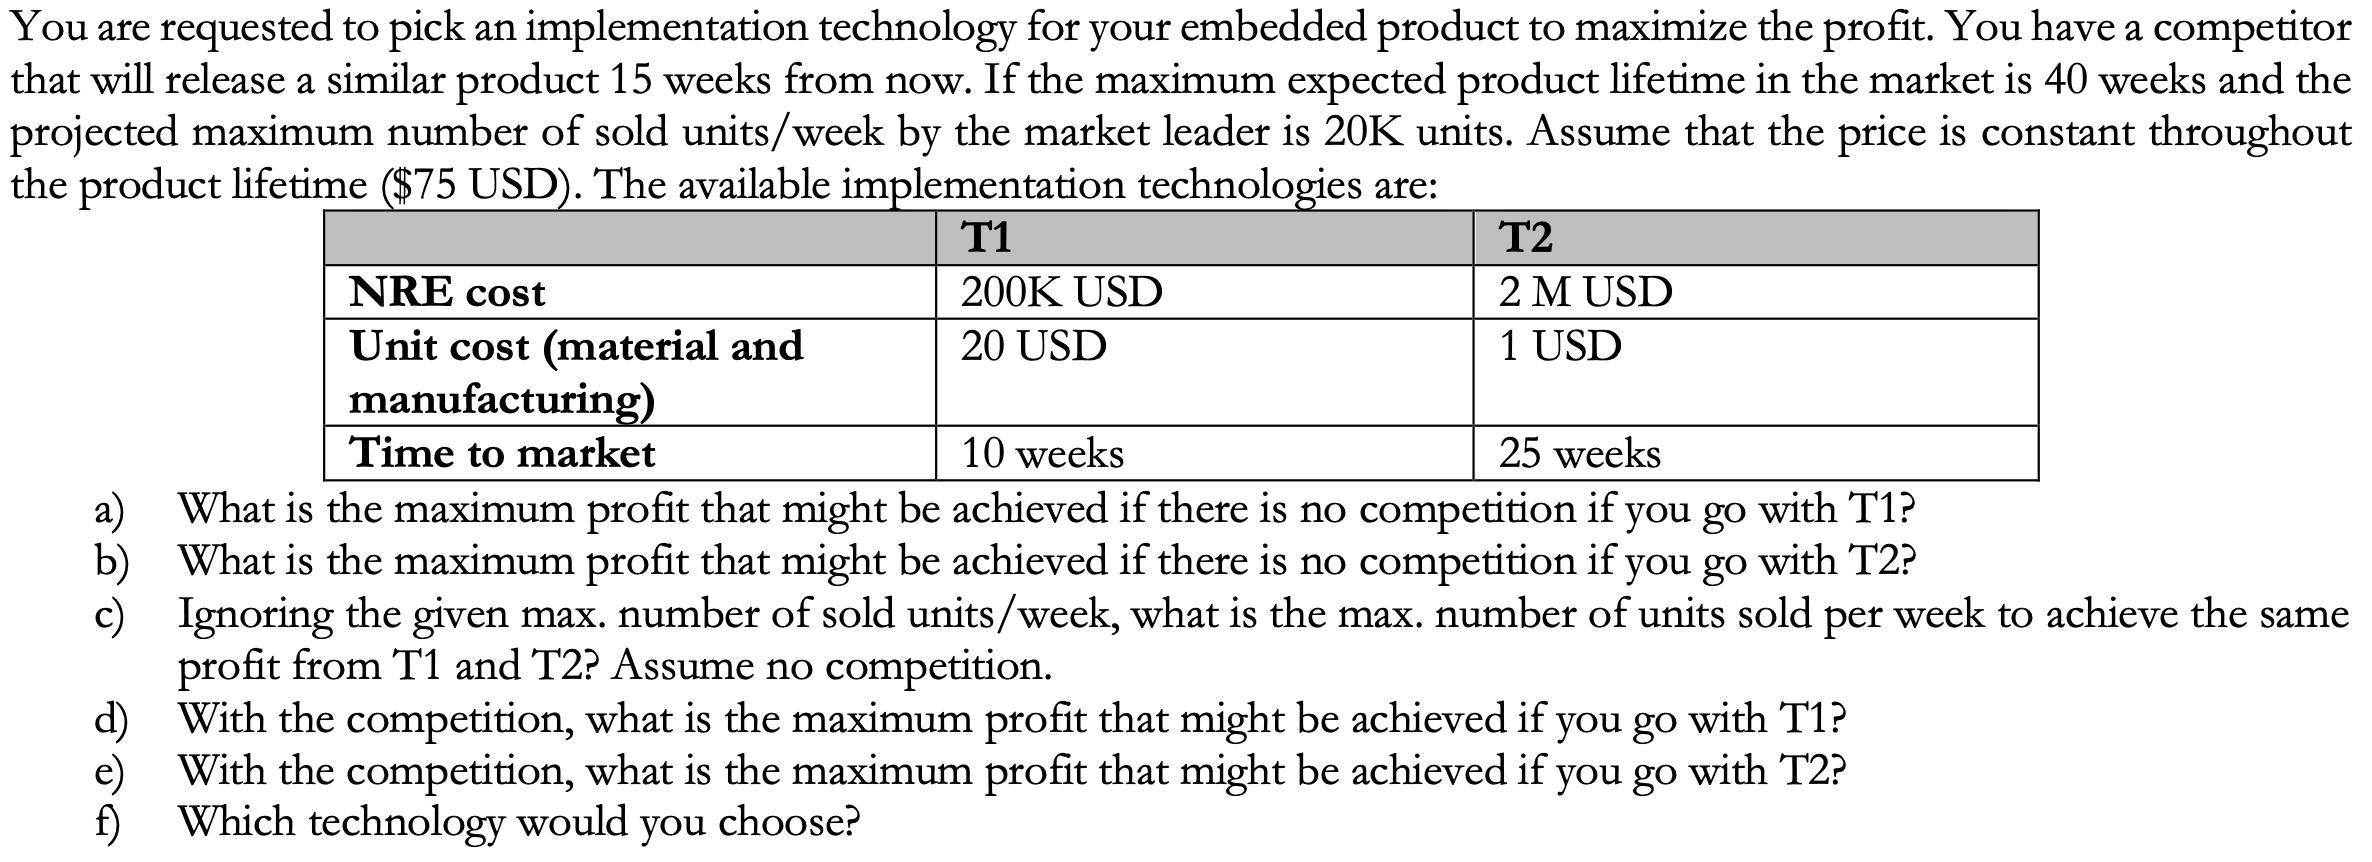 You are requested to pick an implementation technology for your embedded product to maximize the profit. You have a competito